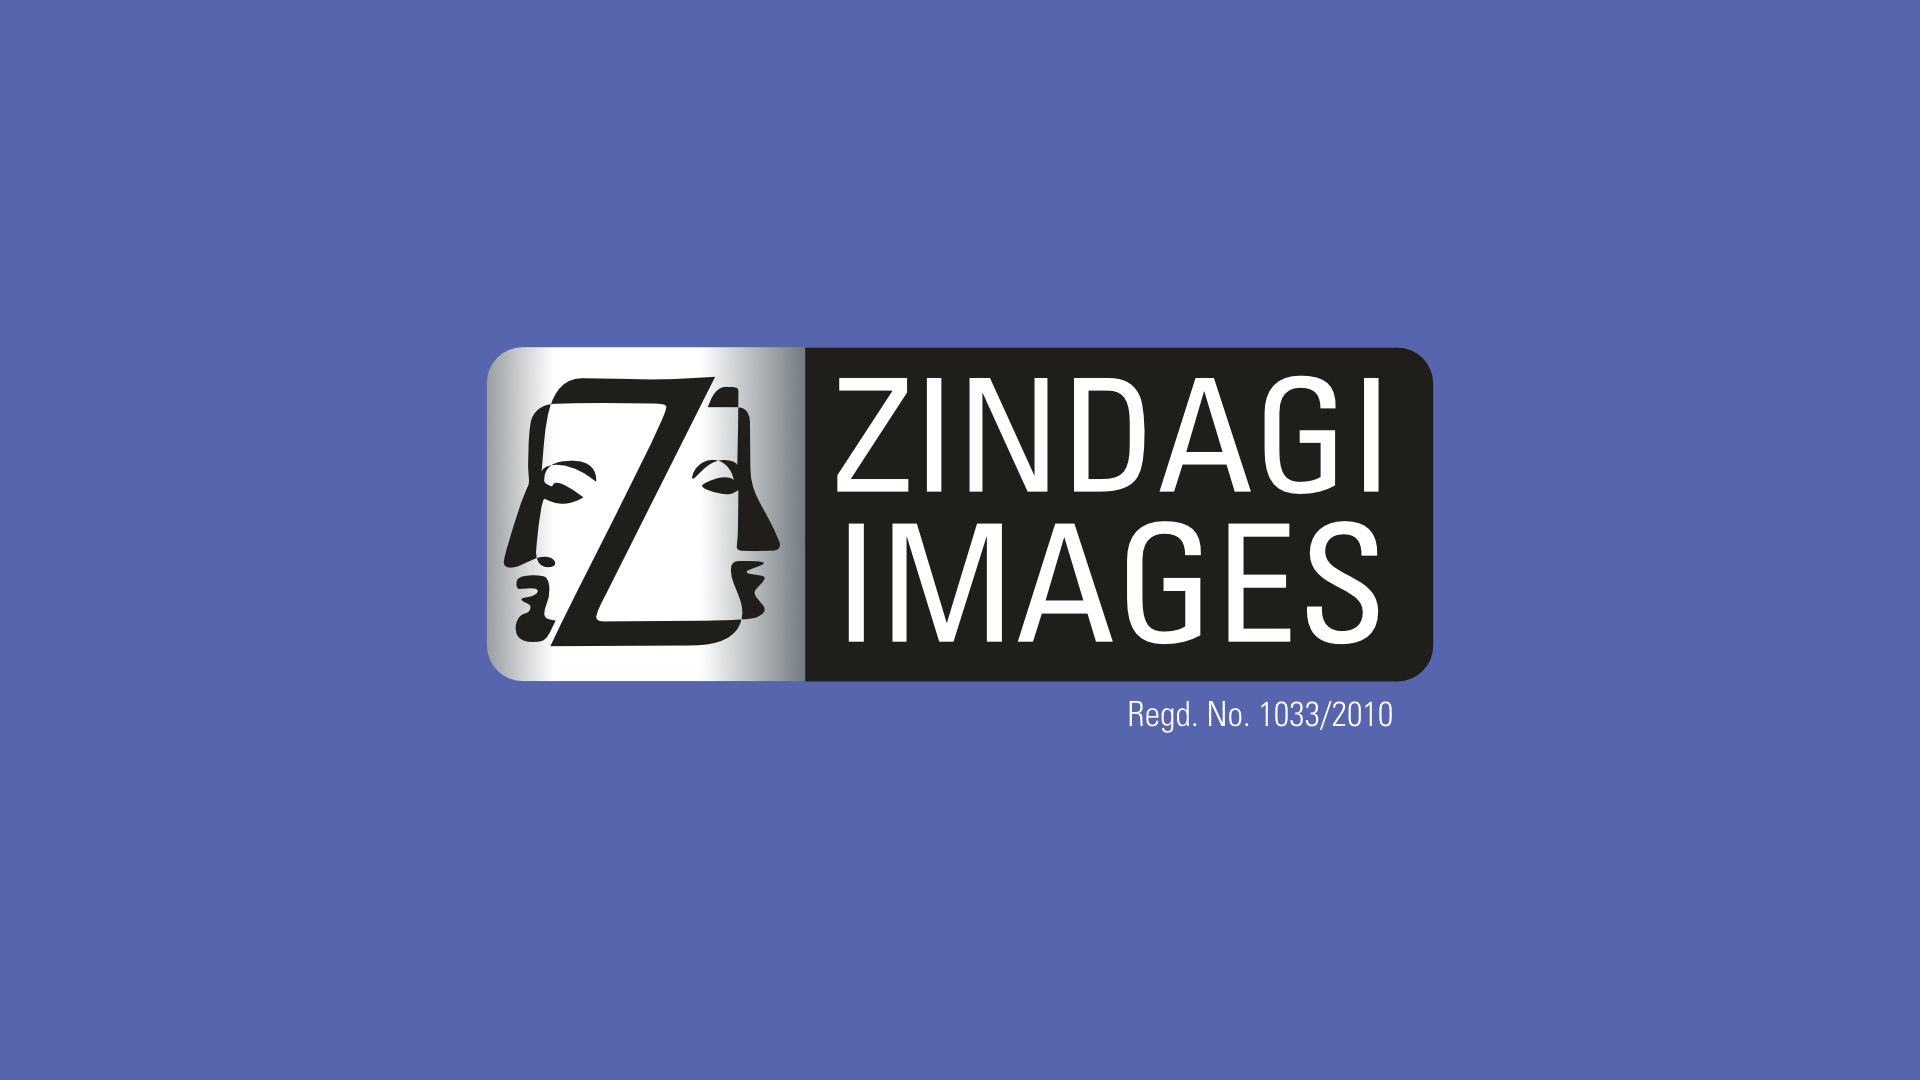 â€˜Zindagiâ€™ means Life. Everything in life has 2 sides. Good and Bad, Light and Dark, Day and Night, Masculine and Feminine, Left and Right, Up and Down. The identity is based on these binary opposites showcasing â€˜Zindagiâ€™ in best possible way. Asides, it is proposed in Black and white to reflect the same.